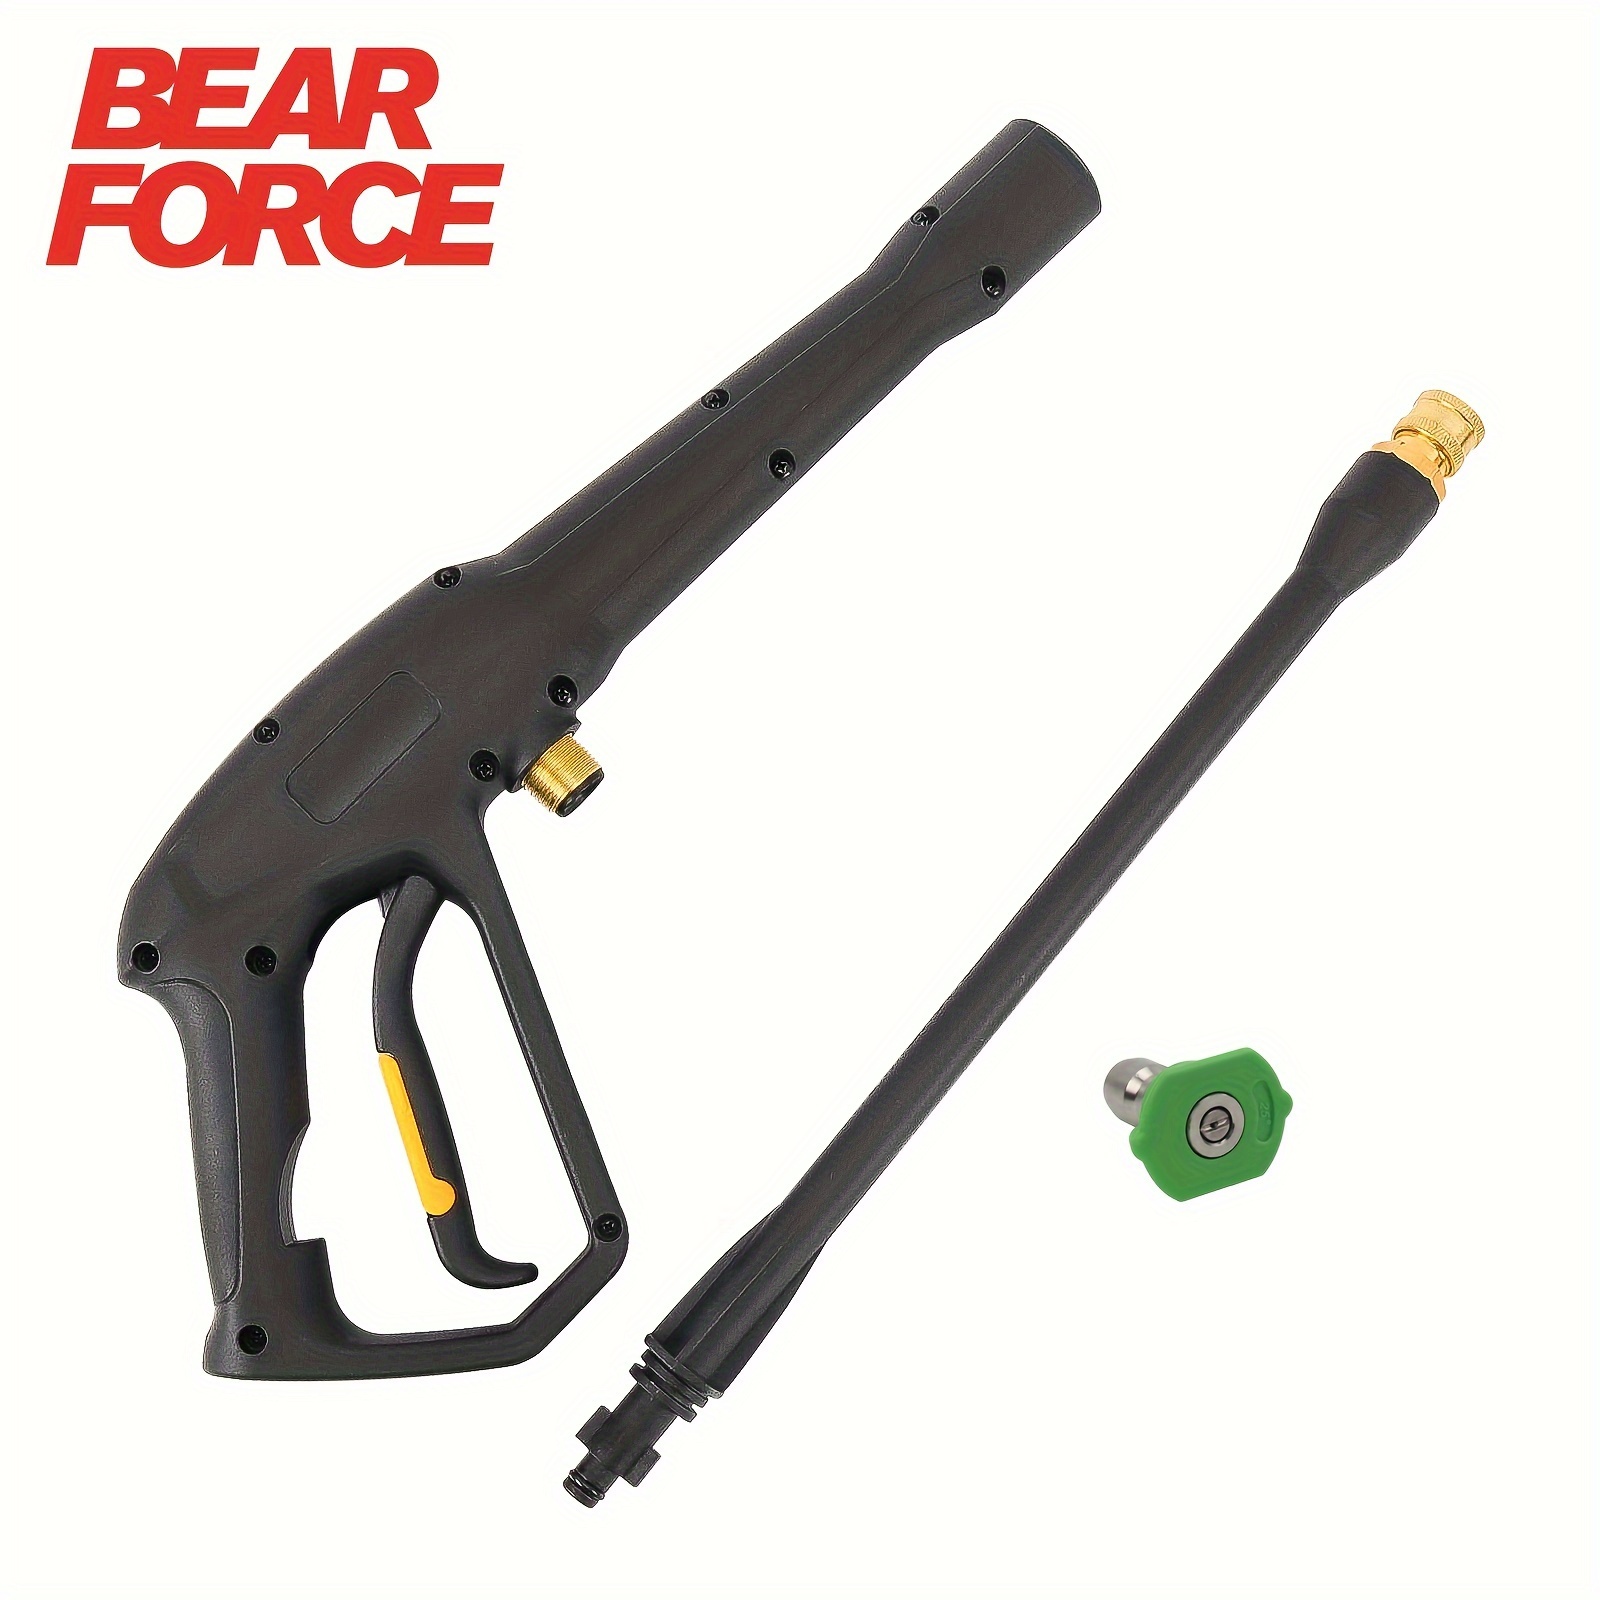 

Bear Force High Pressure Water Spray Gun Wand Jet Nozzle Tips, Power Washer Water Gun Compatible With Some Of Greenworks Karcher Homelite Electric Pressure Washer Max 1900 Psi